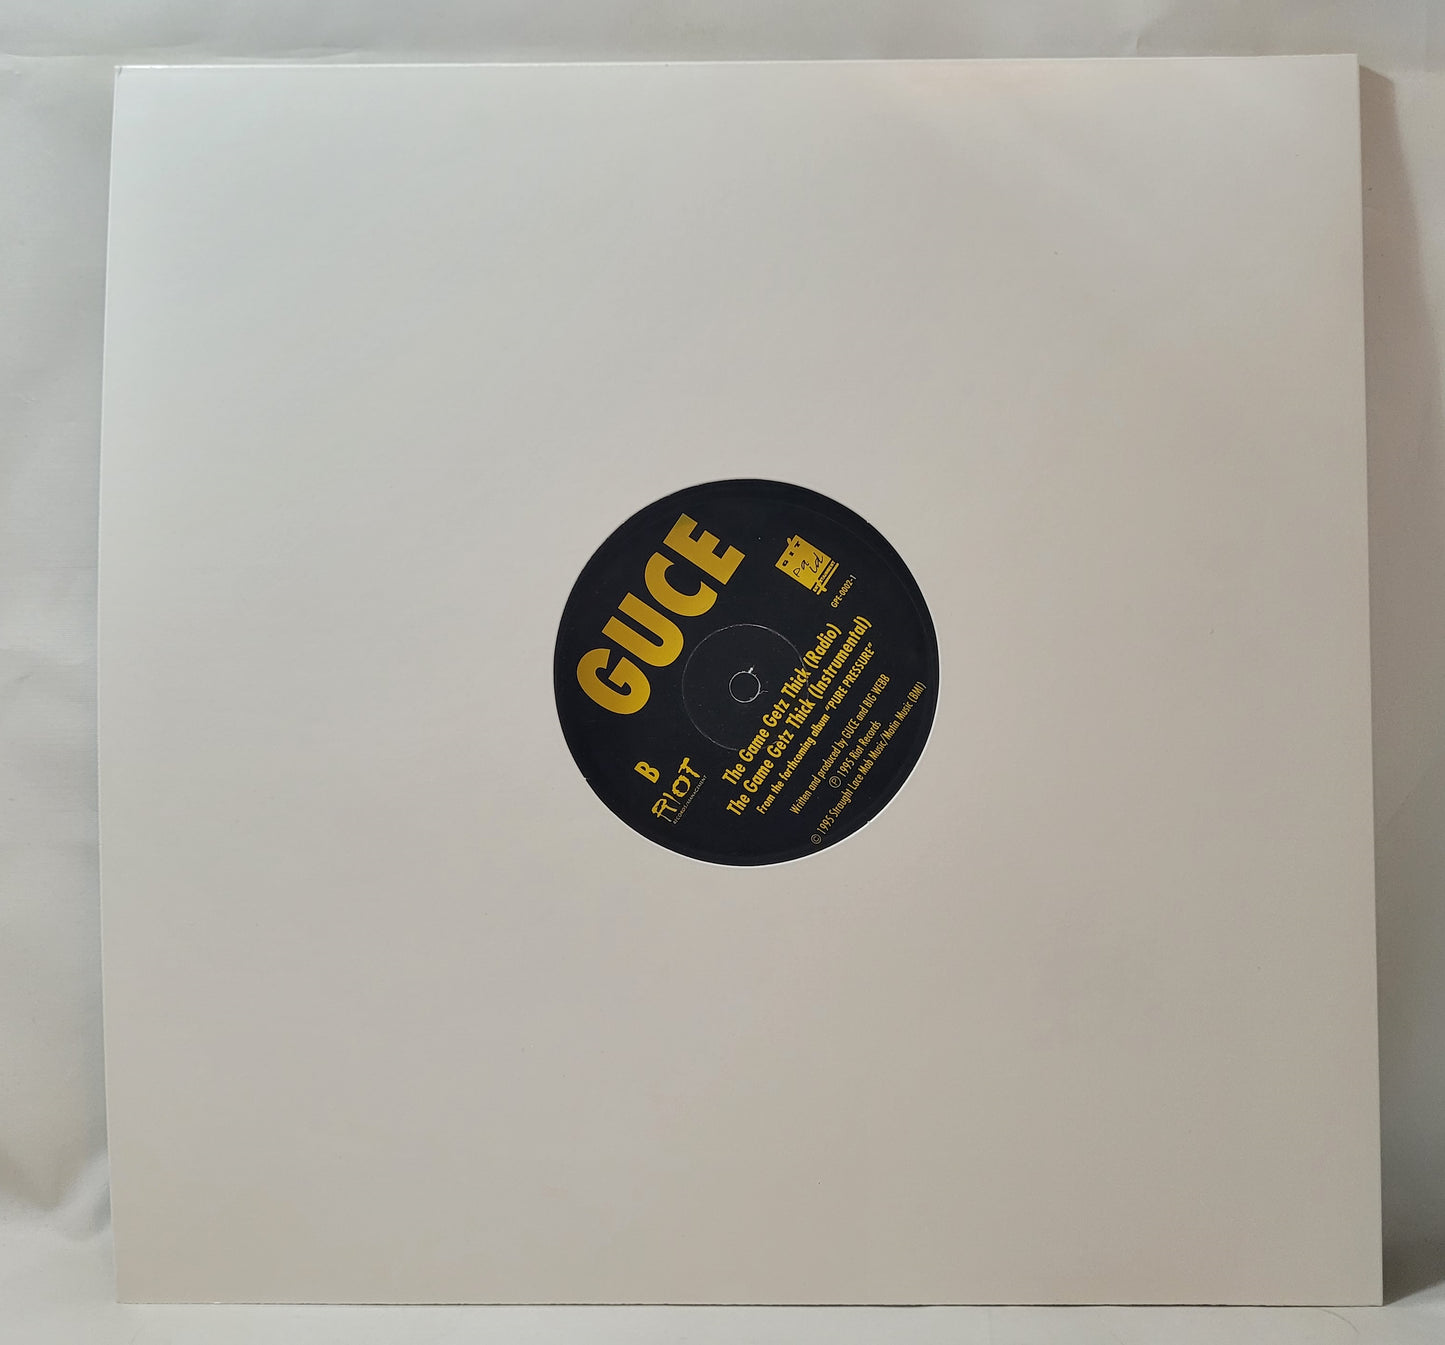 Guce - Western Bay Playa / The Game Getz Thick [Vinyl Record 12" Single]